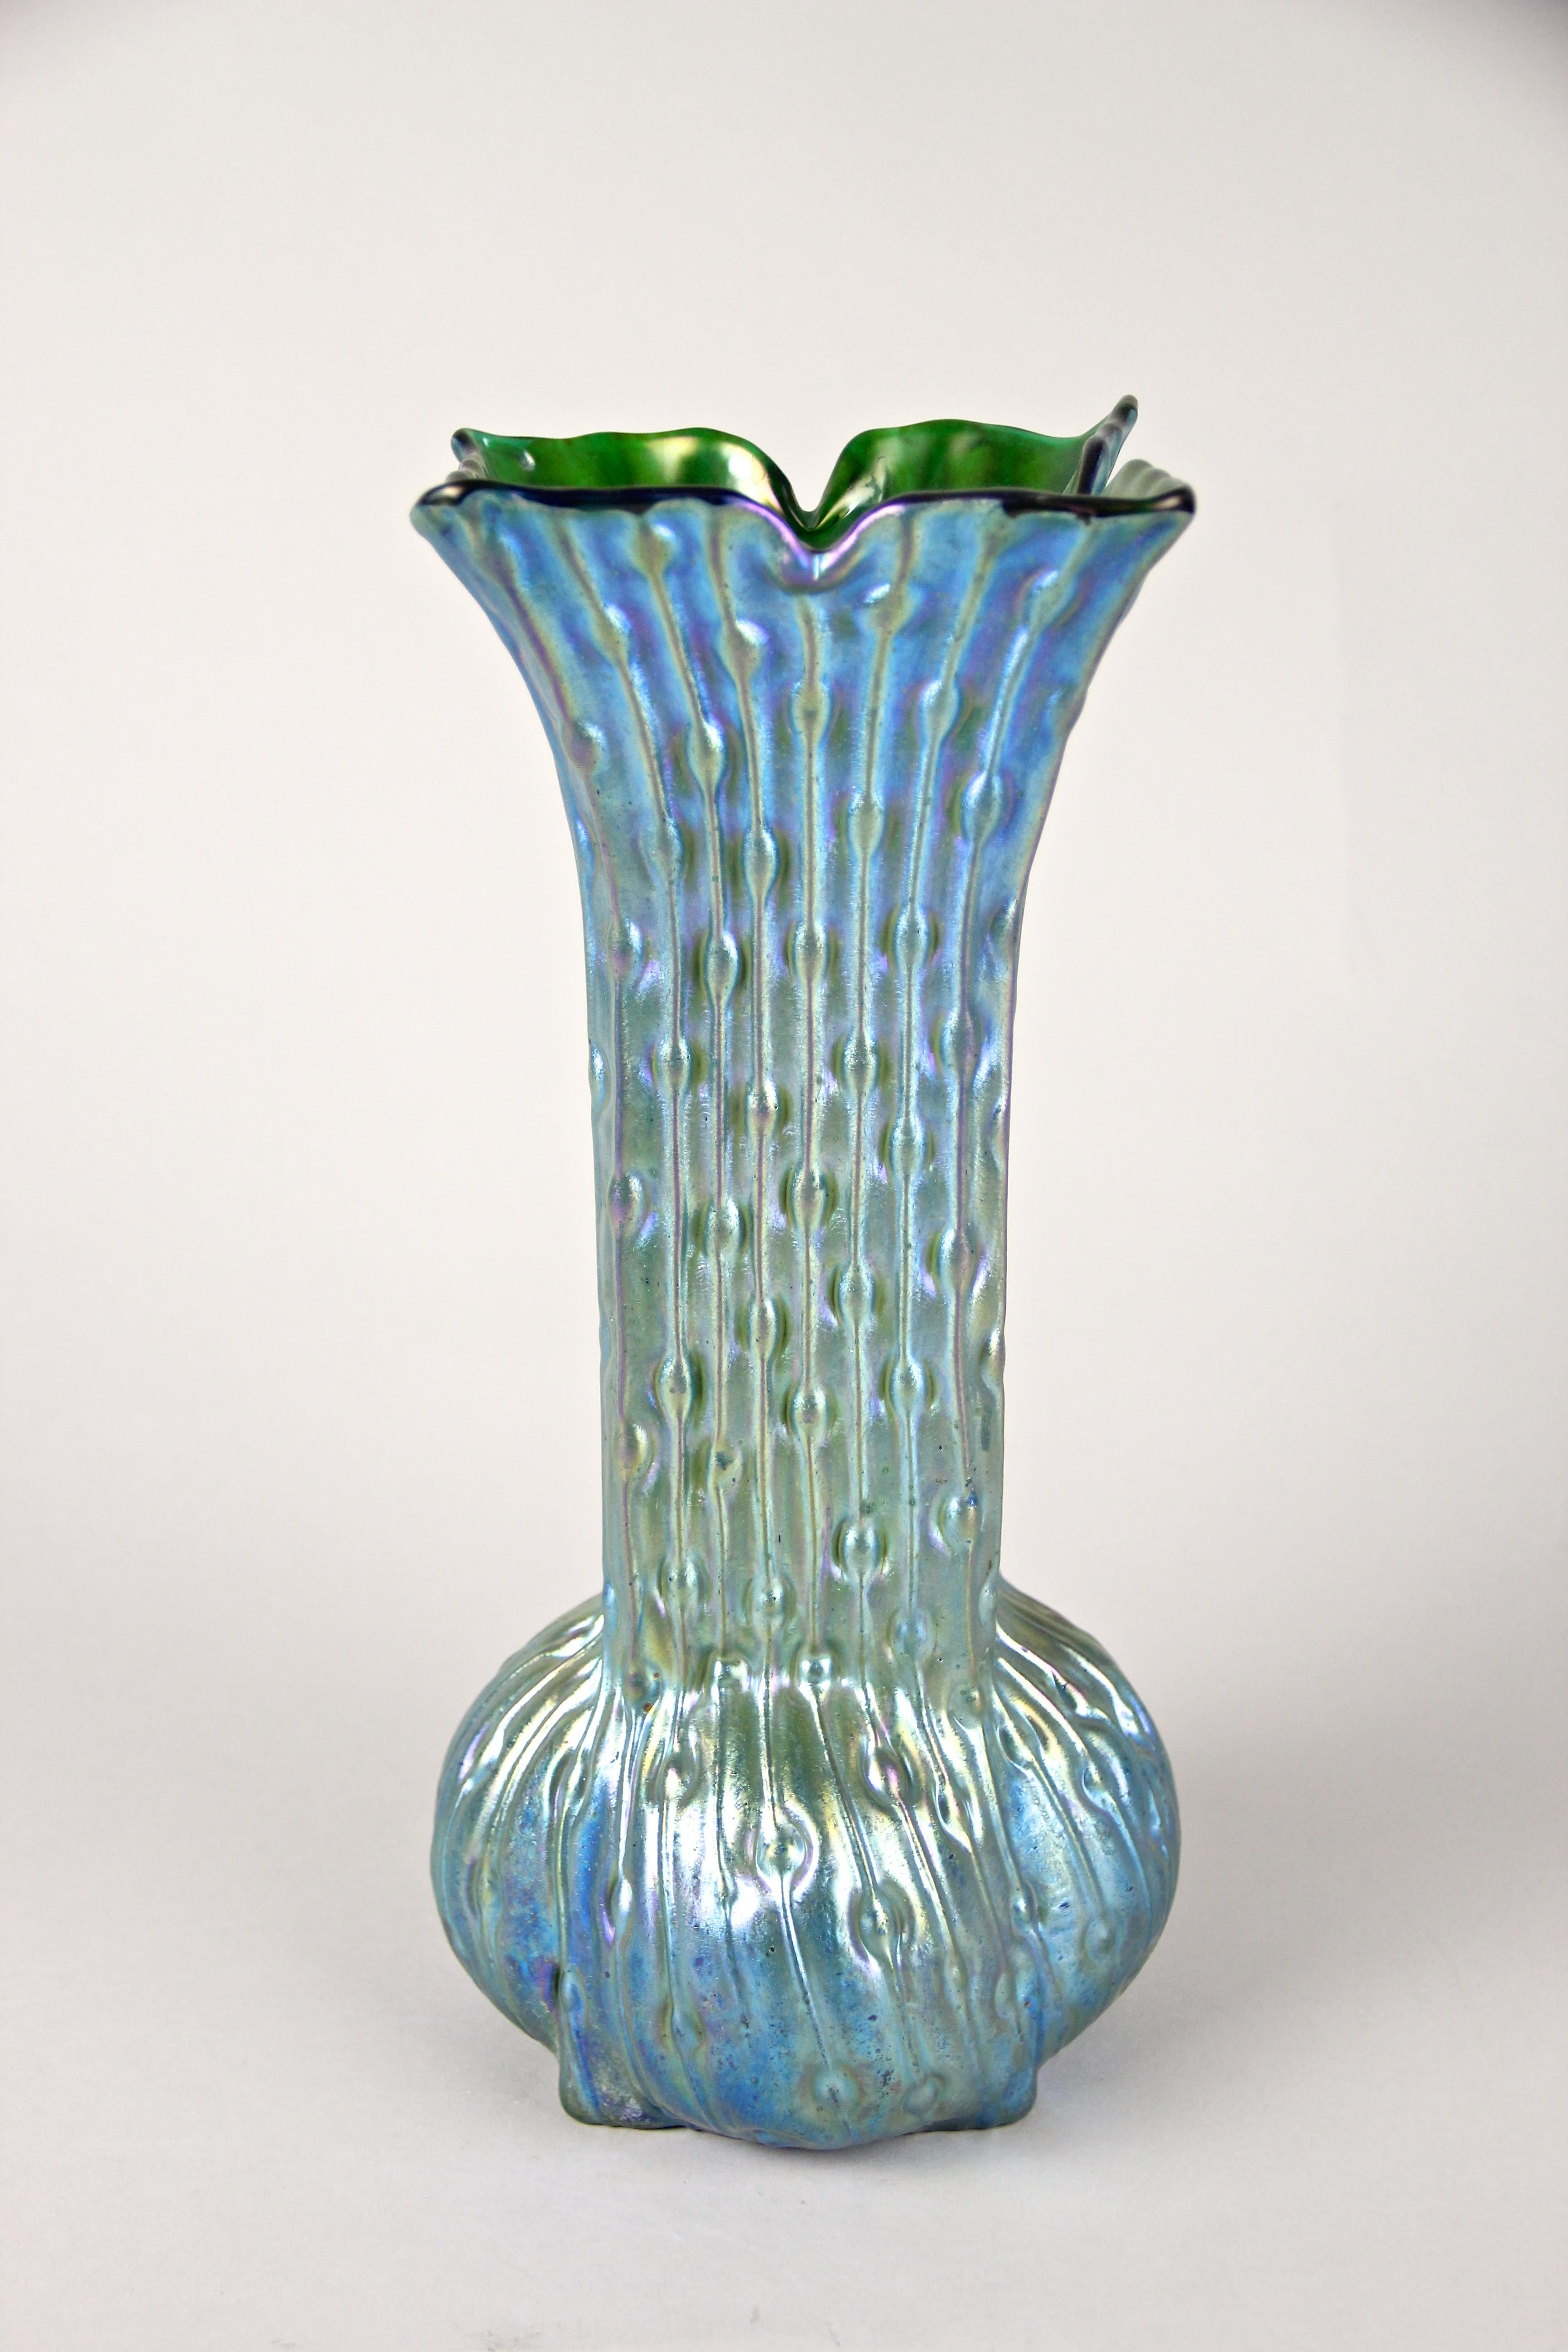 Exceptional Art Nouveau glass vase by Loetz Witwe Klostermuehle, Bohemia, circa 1902. This absolute rare, iriscident Loetz vase shows an unusual shaped body with a beautiful green glass base. The extraordinary decoration, reminding on the 